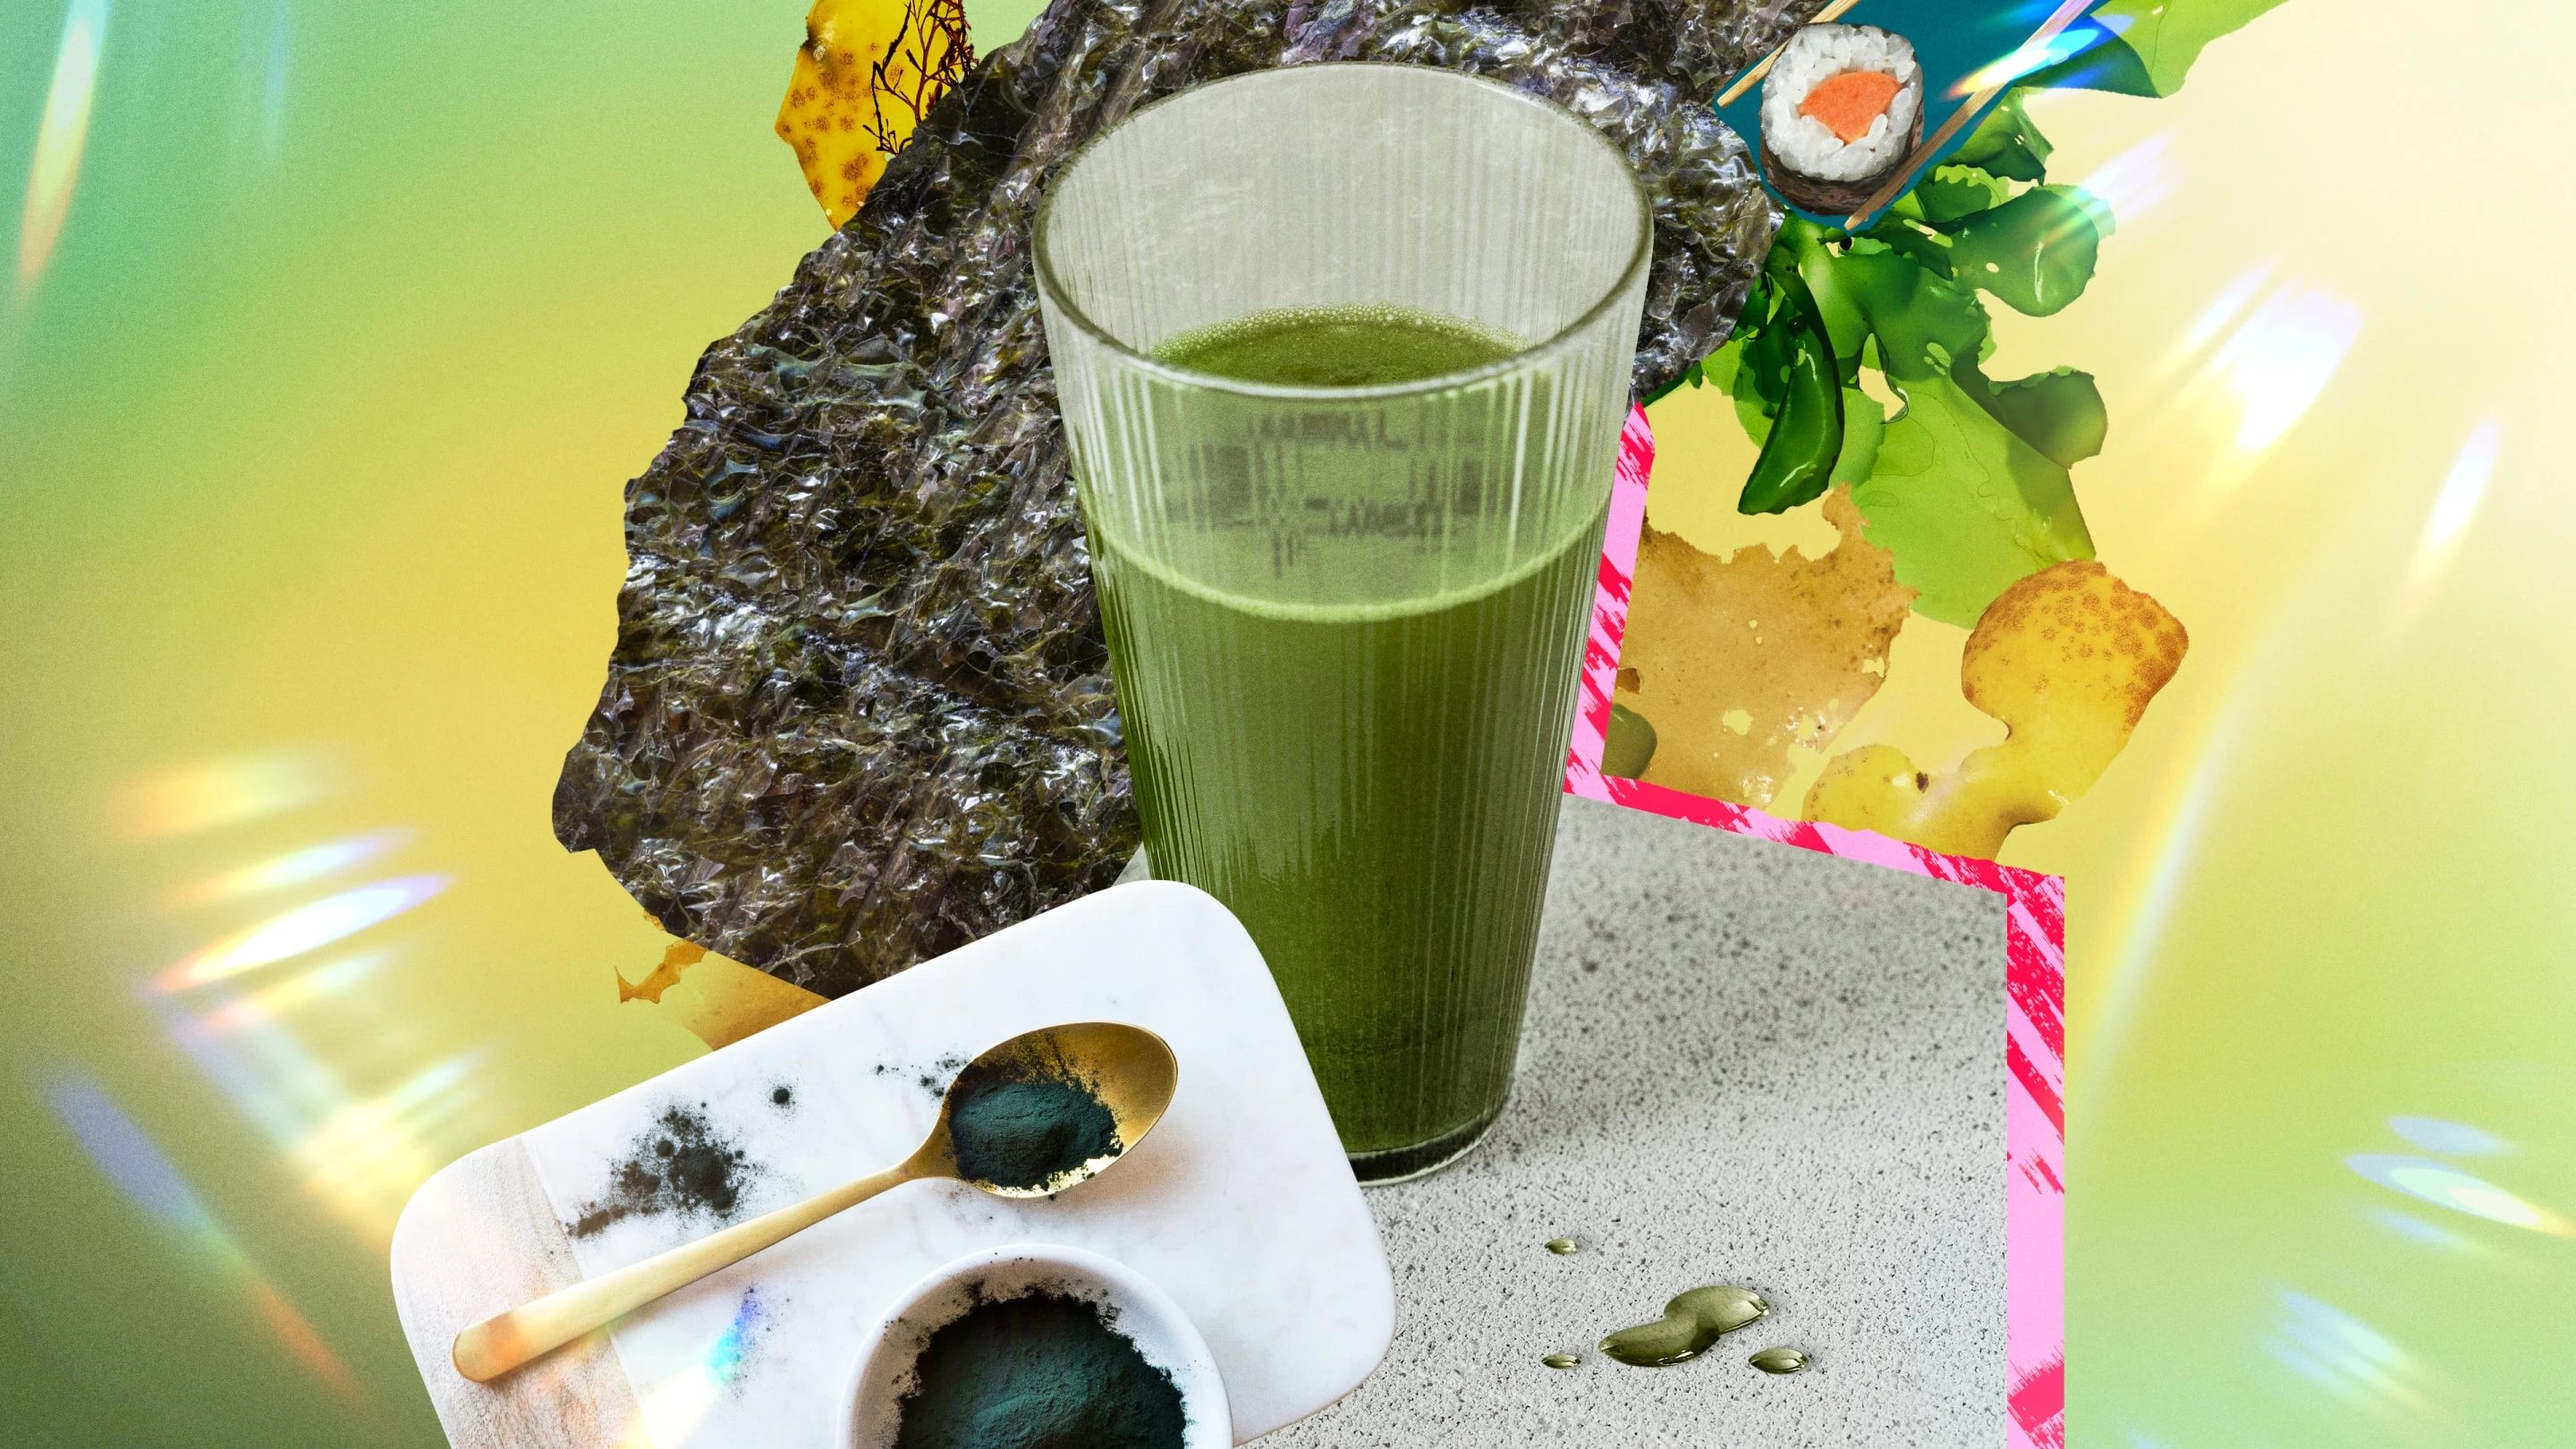 Green juice in a glass centred amongst a collage of seaweed-related items such as sushi, powdered seaweed, chopsticks and cooked seaweed.